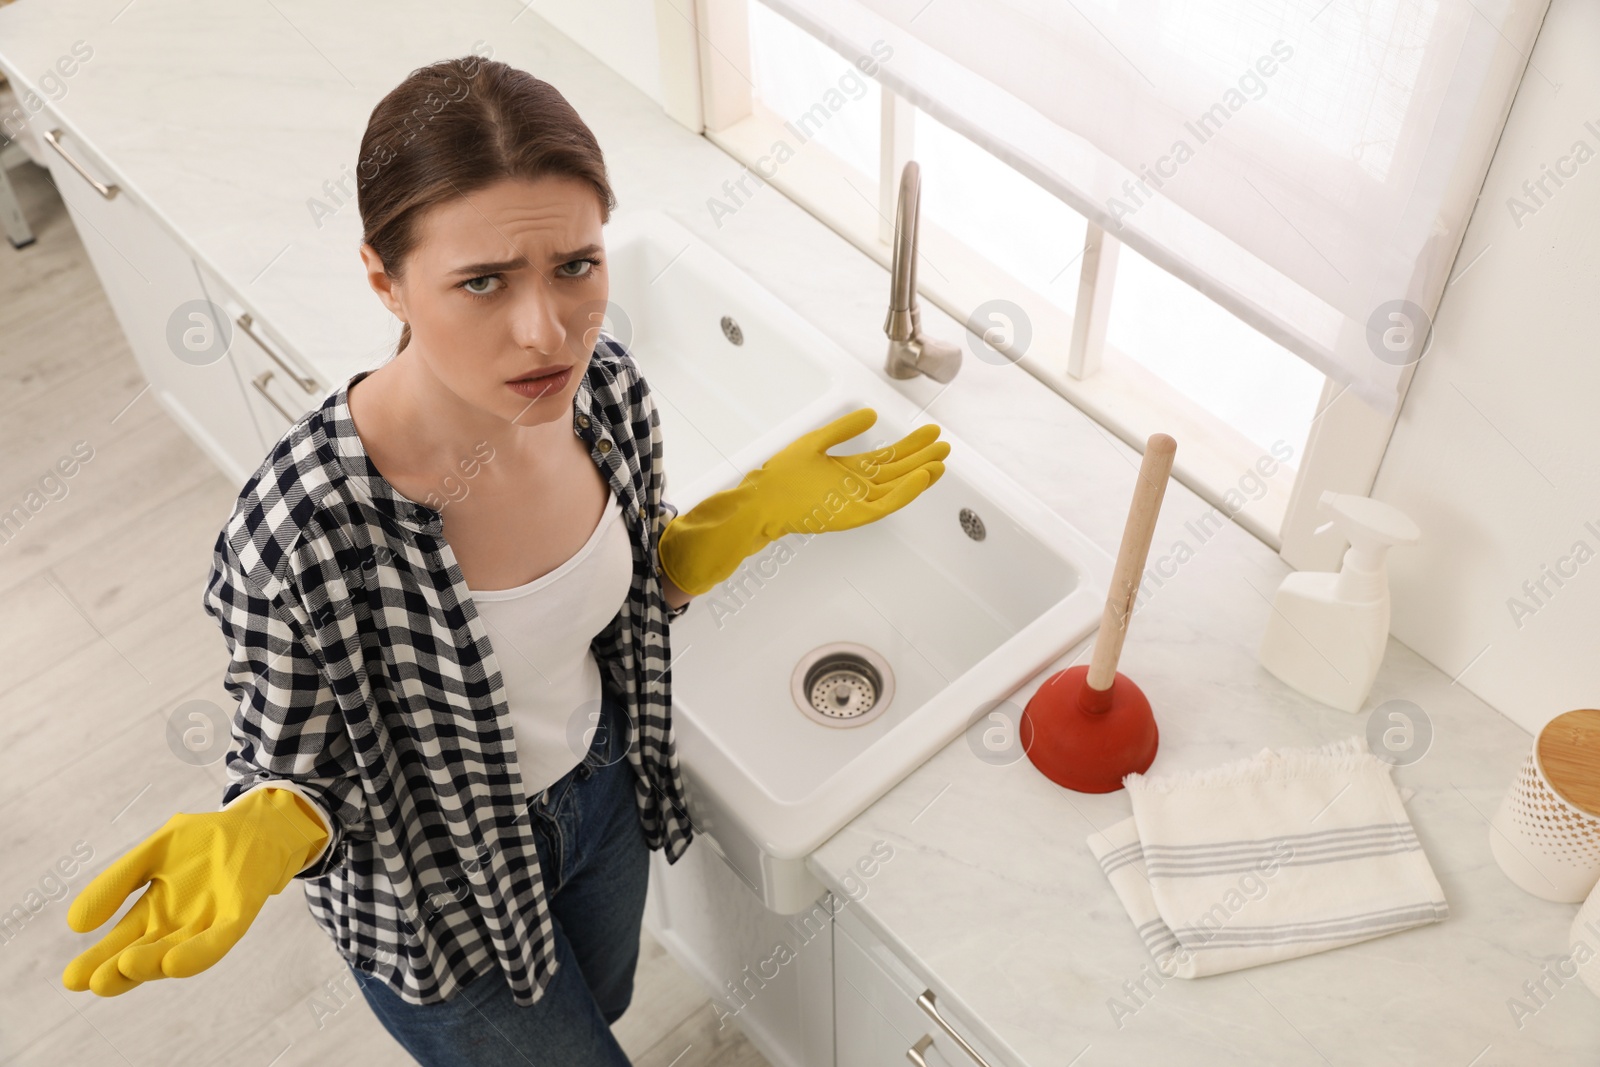 Photo of Upset young woman with plunger near sink in kitchen, above view